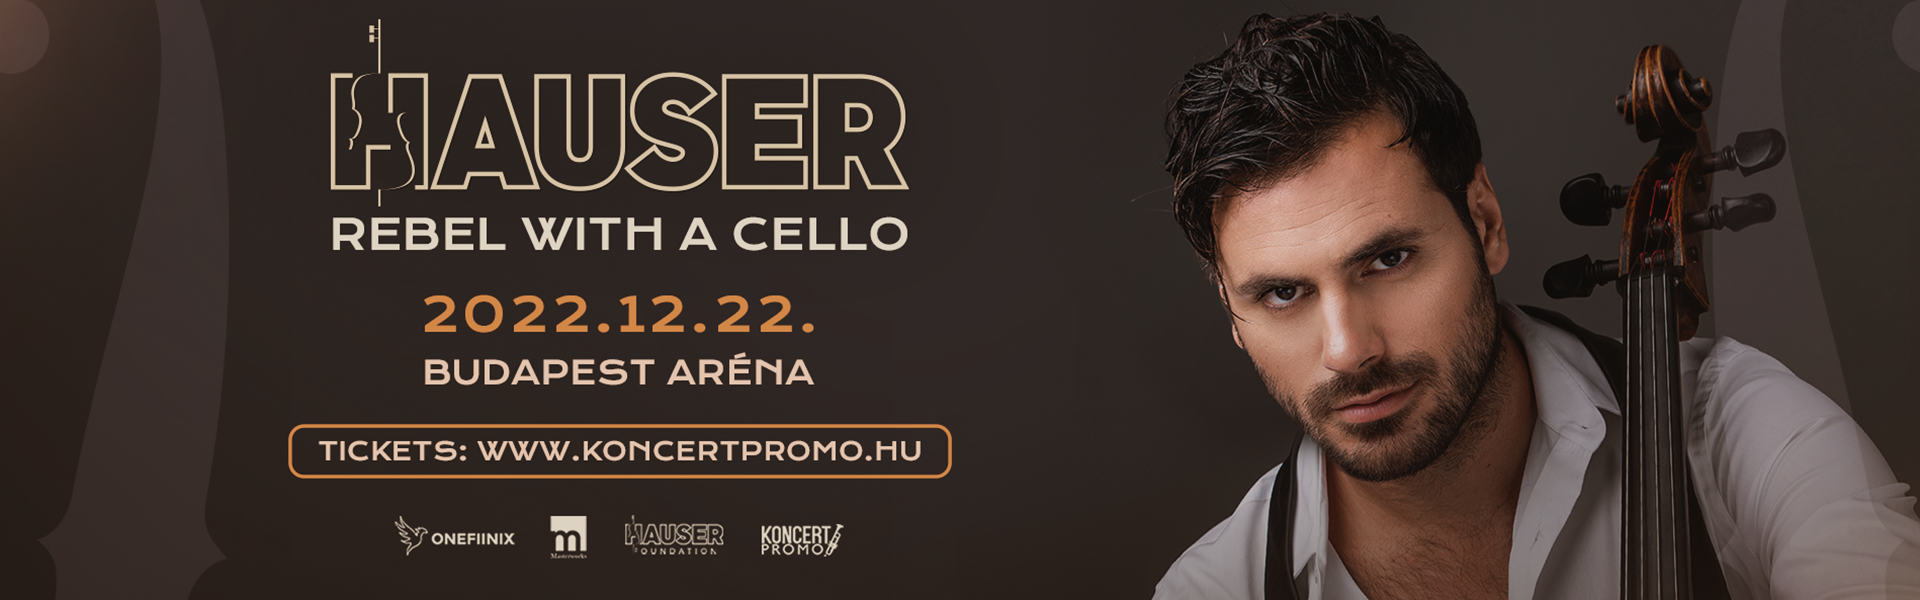 Hauser’s First-Ever Solo Tour “Rebel With A Cello”, Budapest Aréna, 22 December